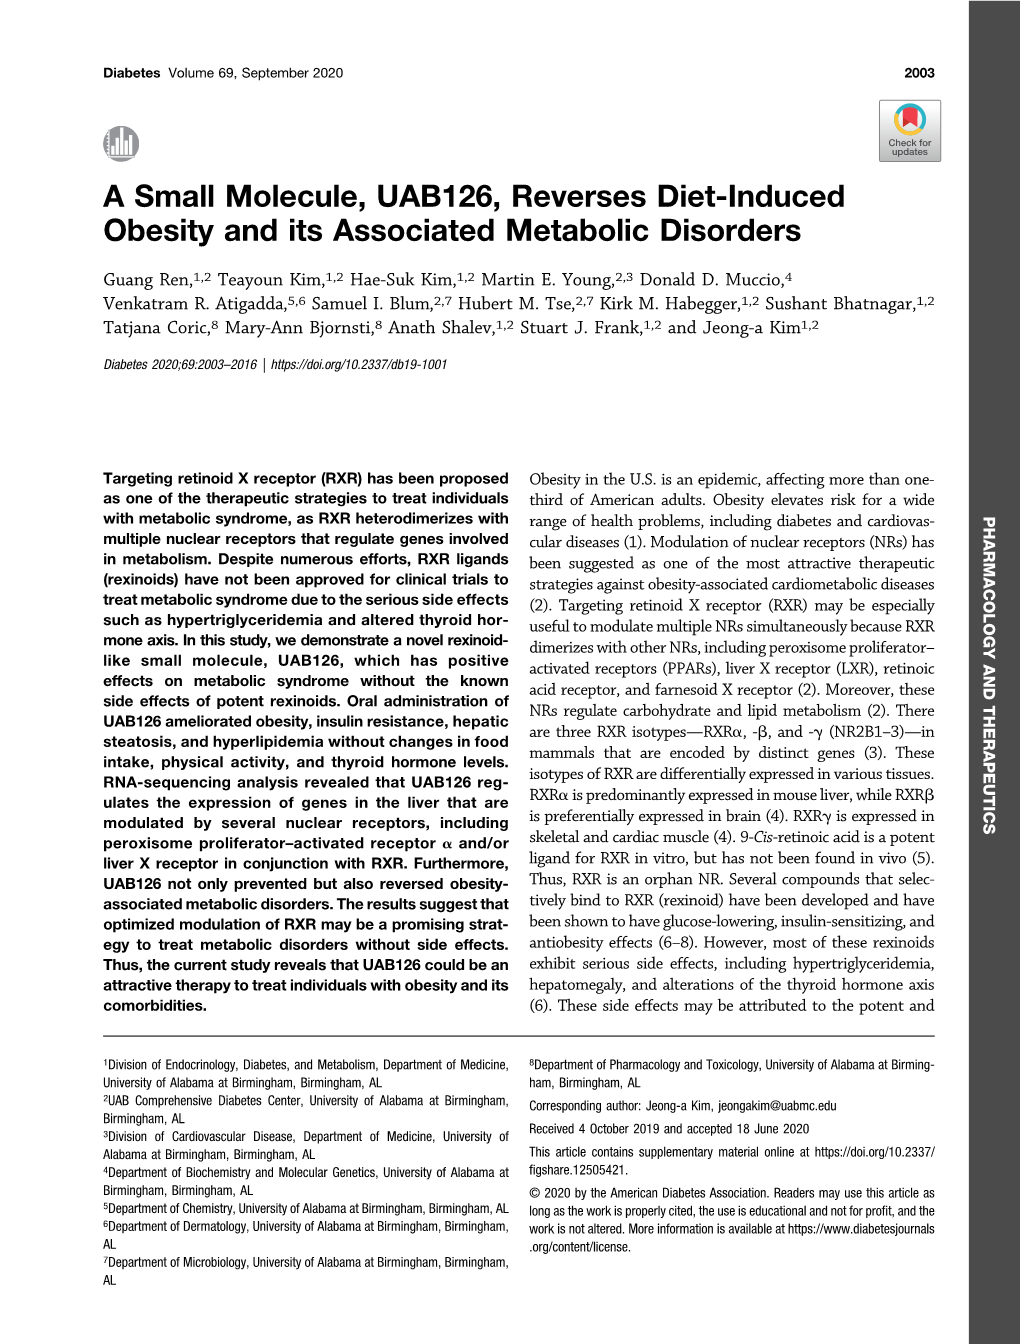 A Small Molecule, UAB126, Reverses Diet-Induced Obesity and Its Associated Metabolic Disorders